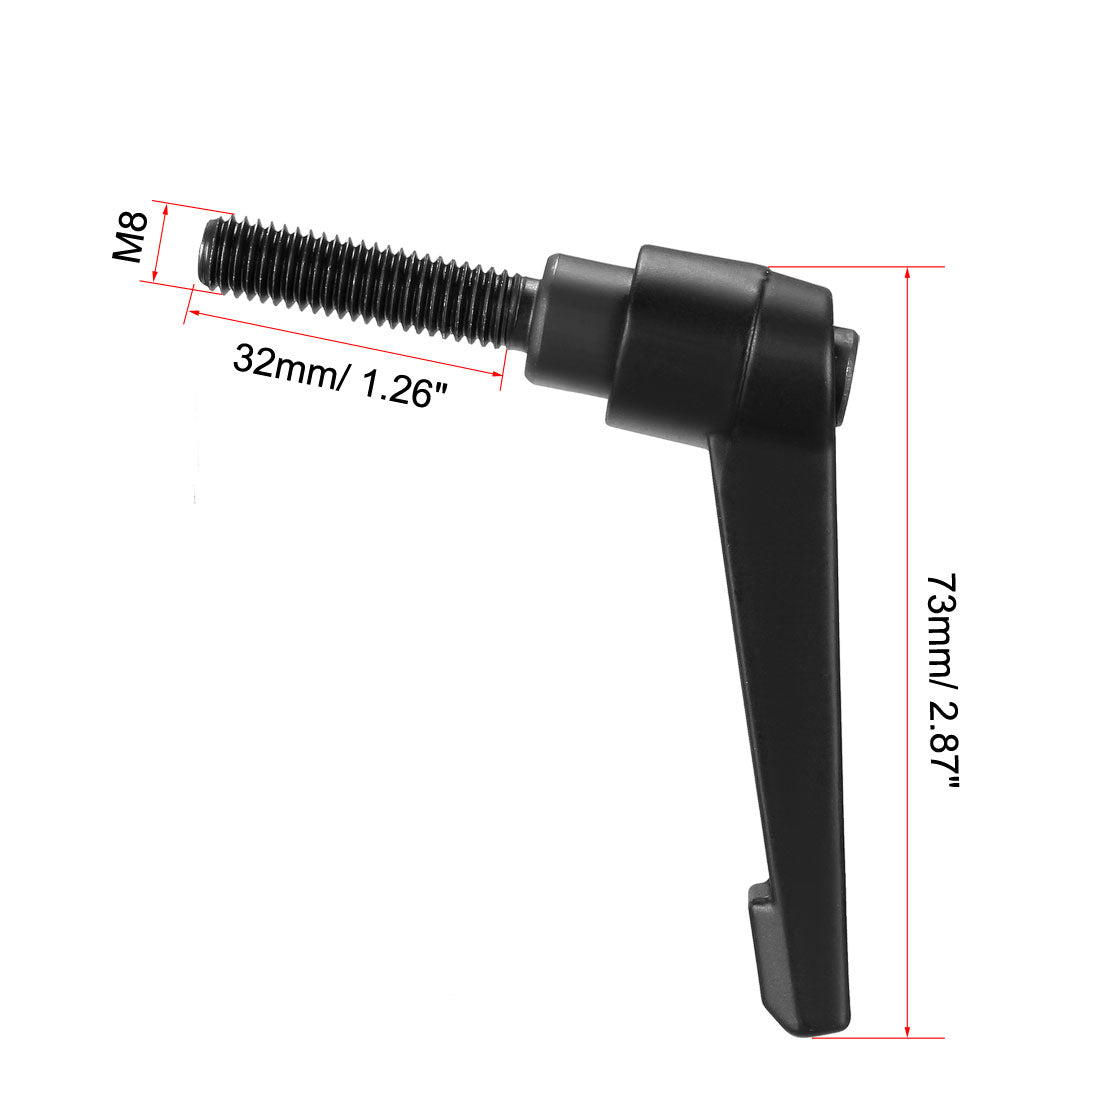 Uxcell Uxcell M8 x 32mm Handle Adjustable Clamping Lever Thread Push Button Ratchet Male Threaded Stud 3 Pcs